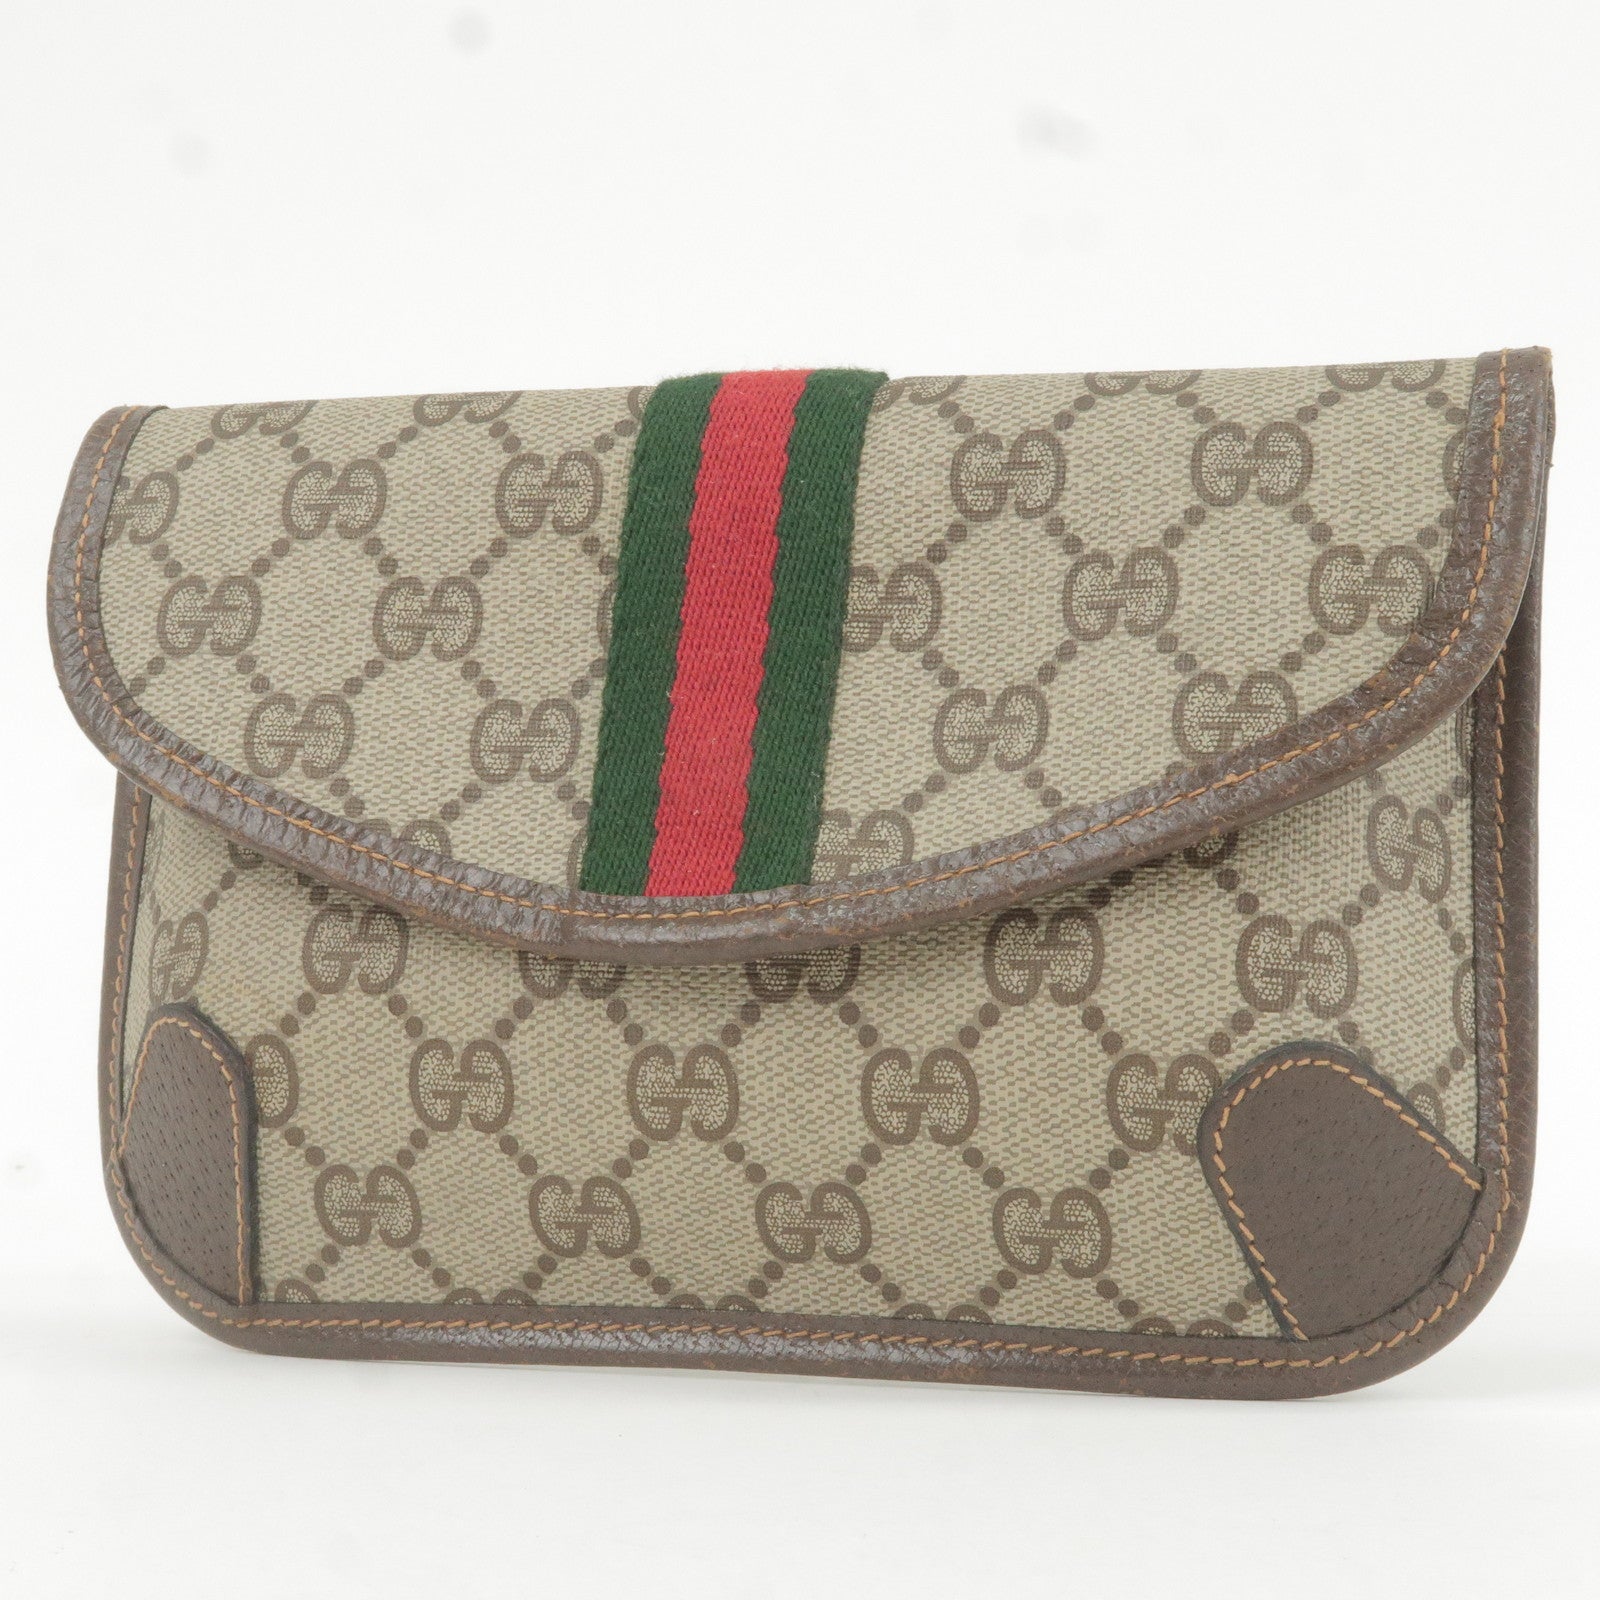 GUCCI-Sherry-GG-Plus-Leather-Clutch-Bag-Pouch-Beige-89.01.021 